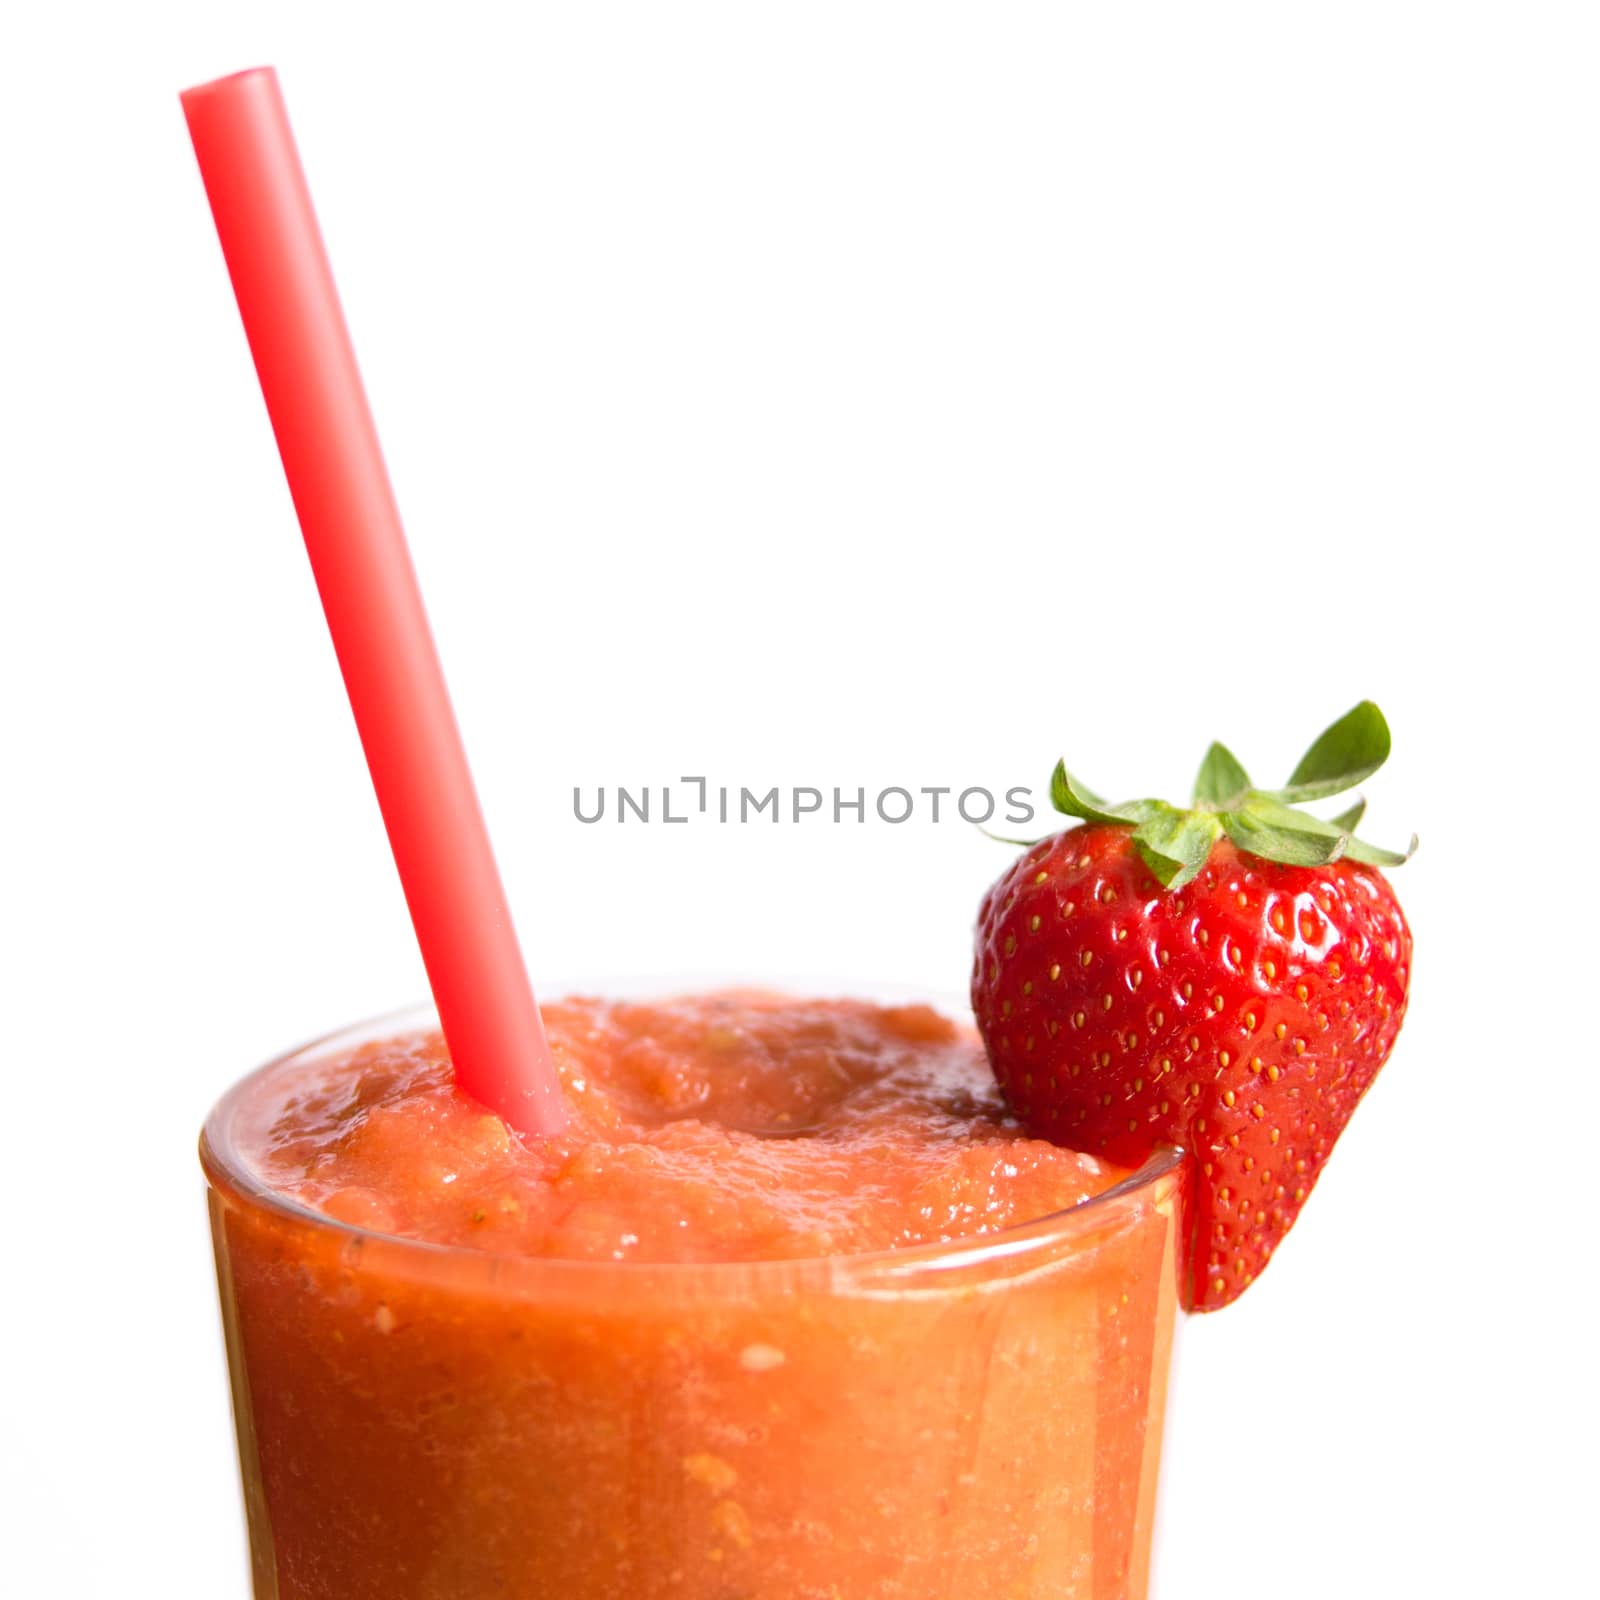 Isolated strawberry smoothie in glass with straw